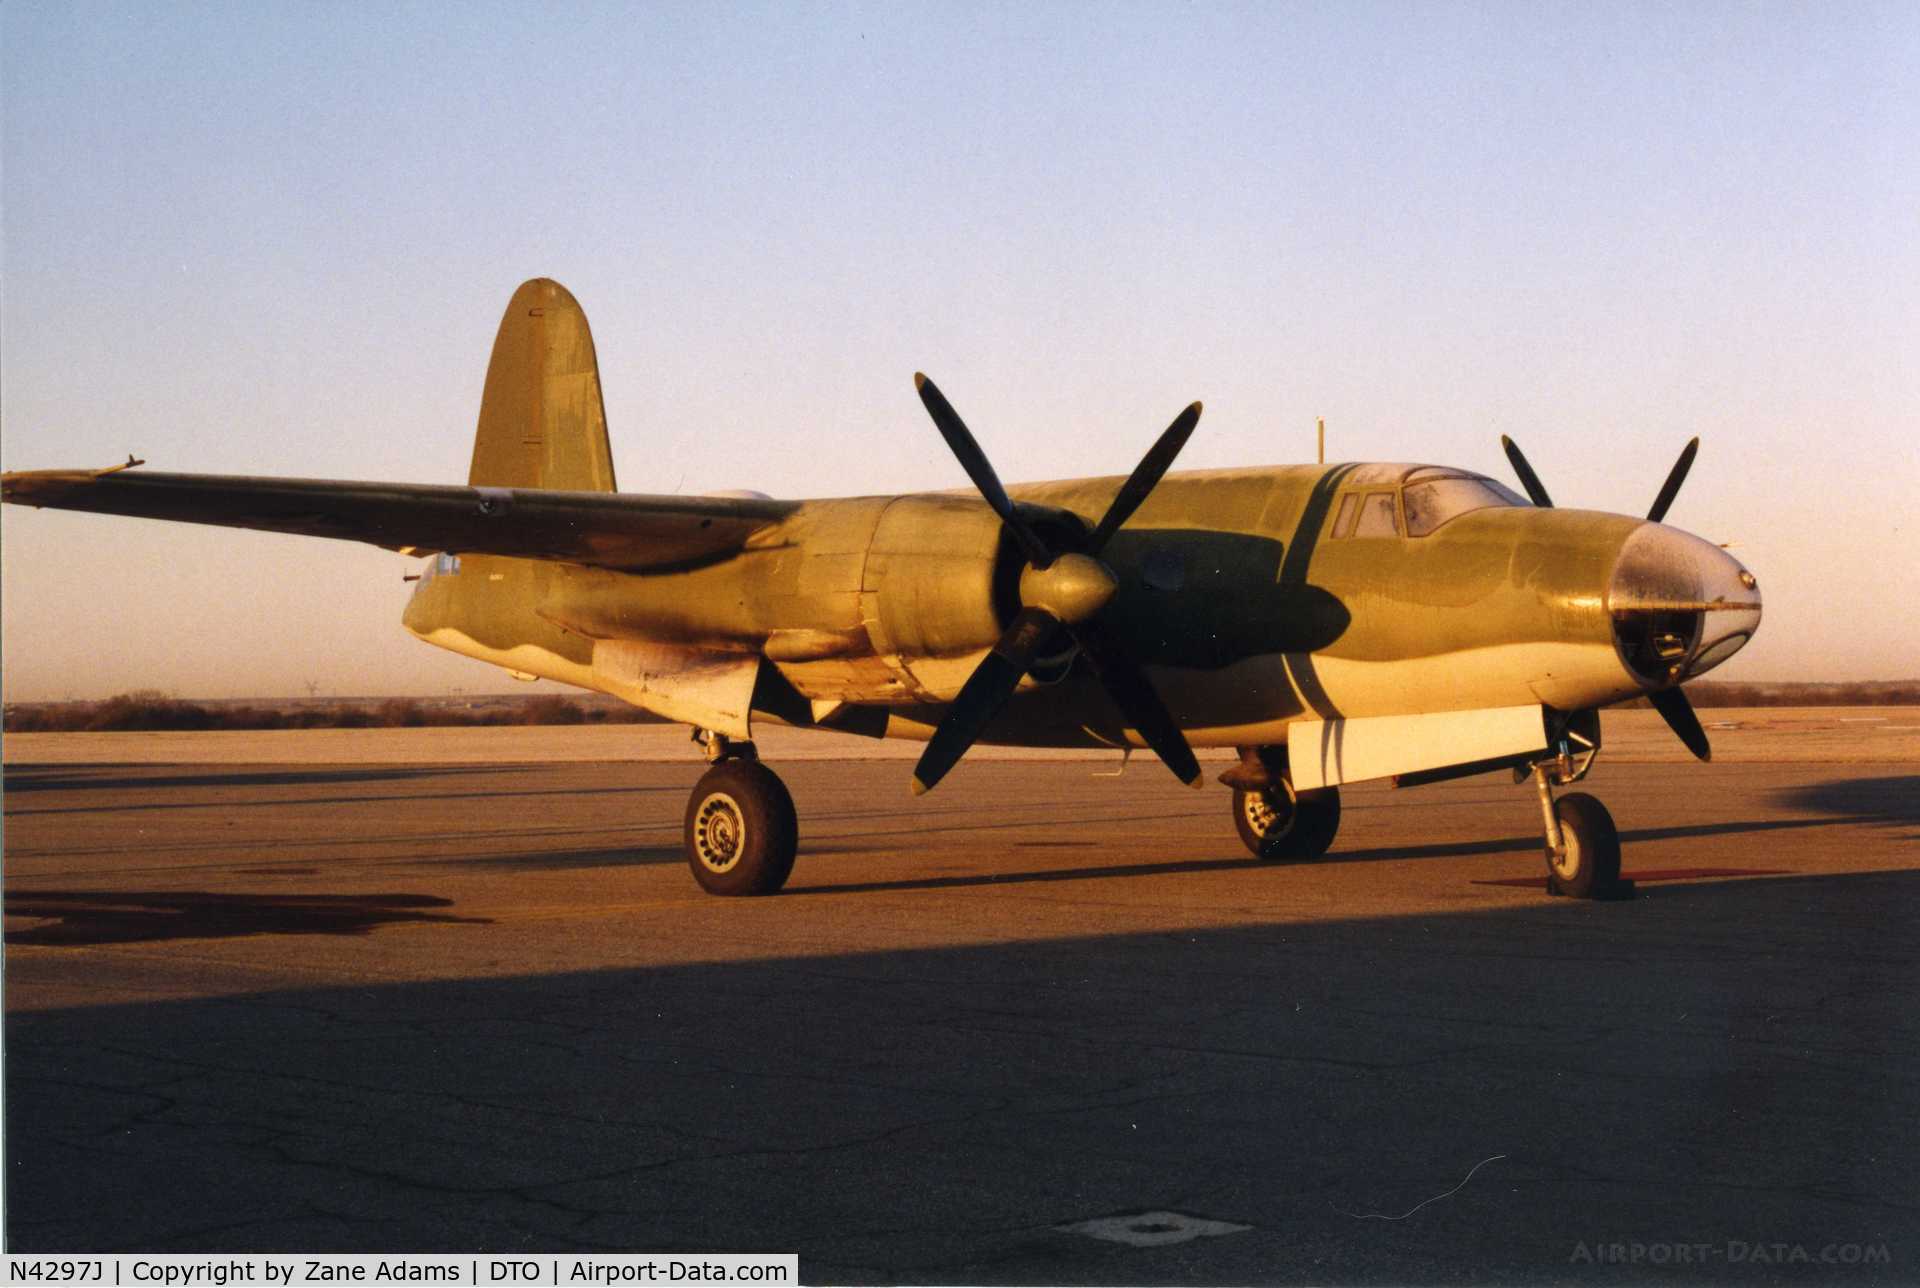 N4297J, 1940 Martin B-26 Marauder C/N 40-1464, At Denton TX overnight stop on cross country delivery flight by Kermit Weeks